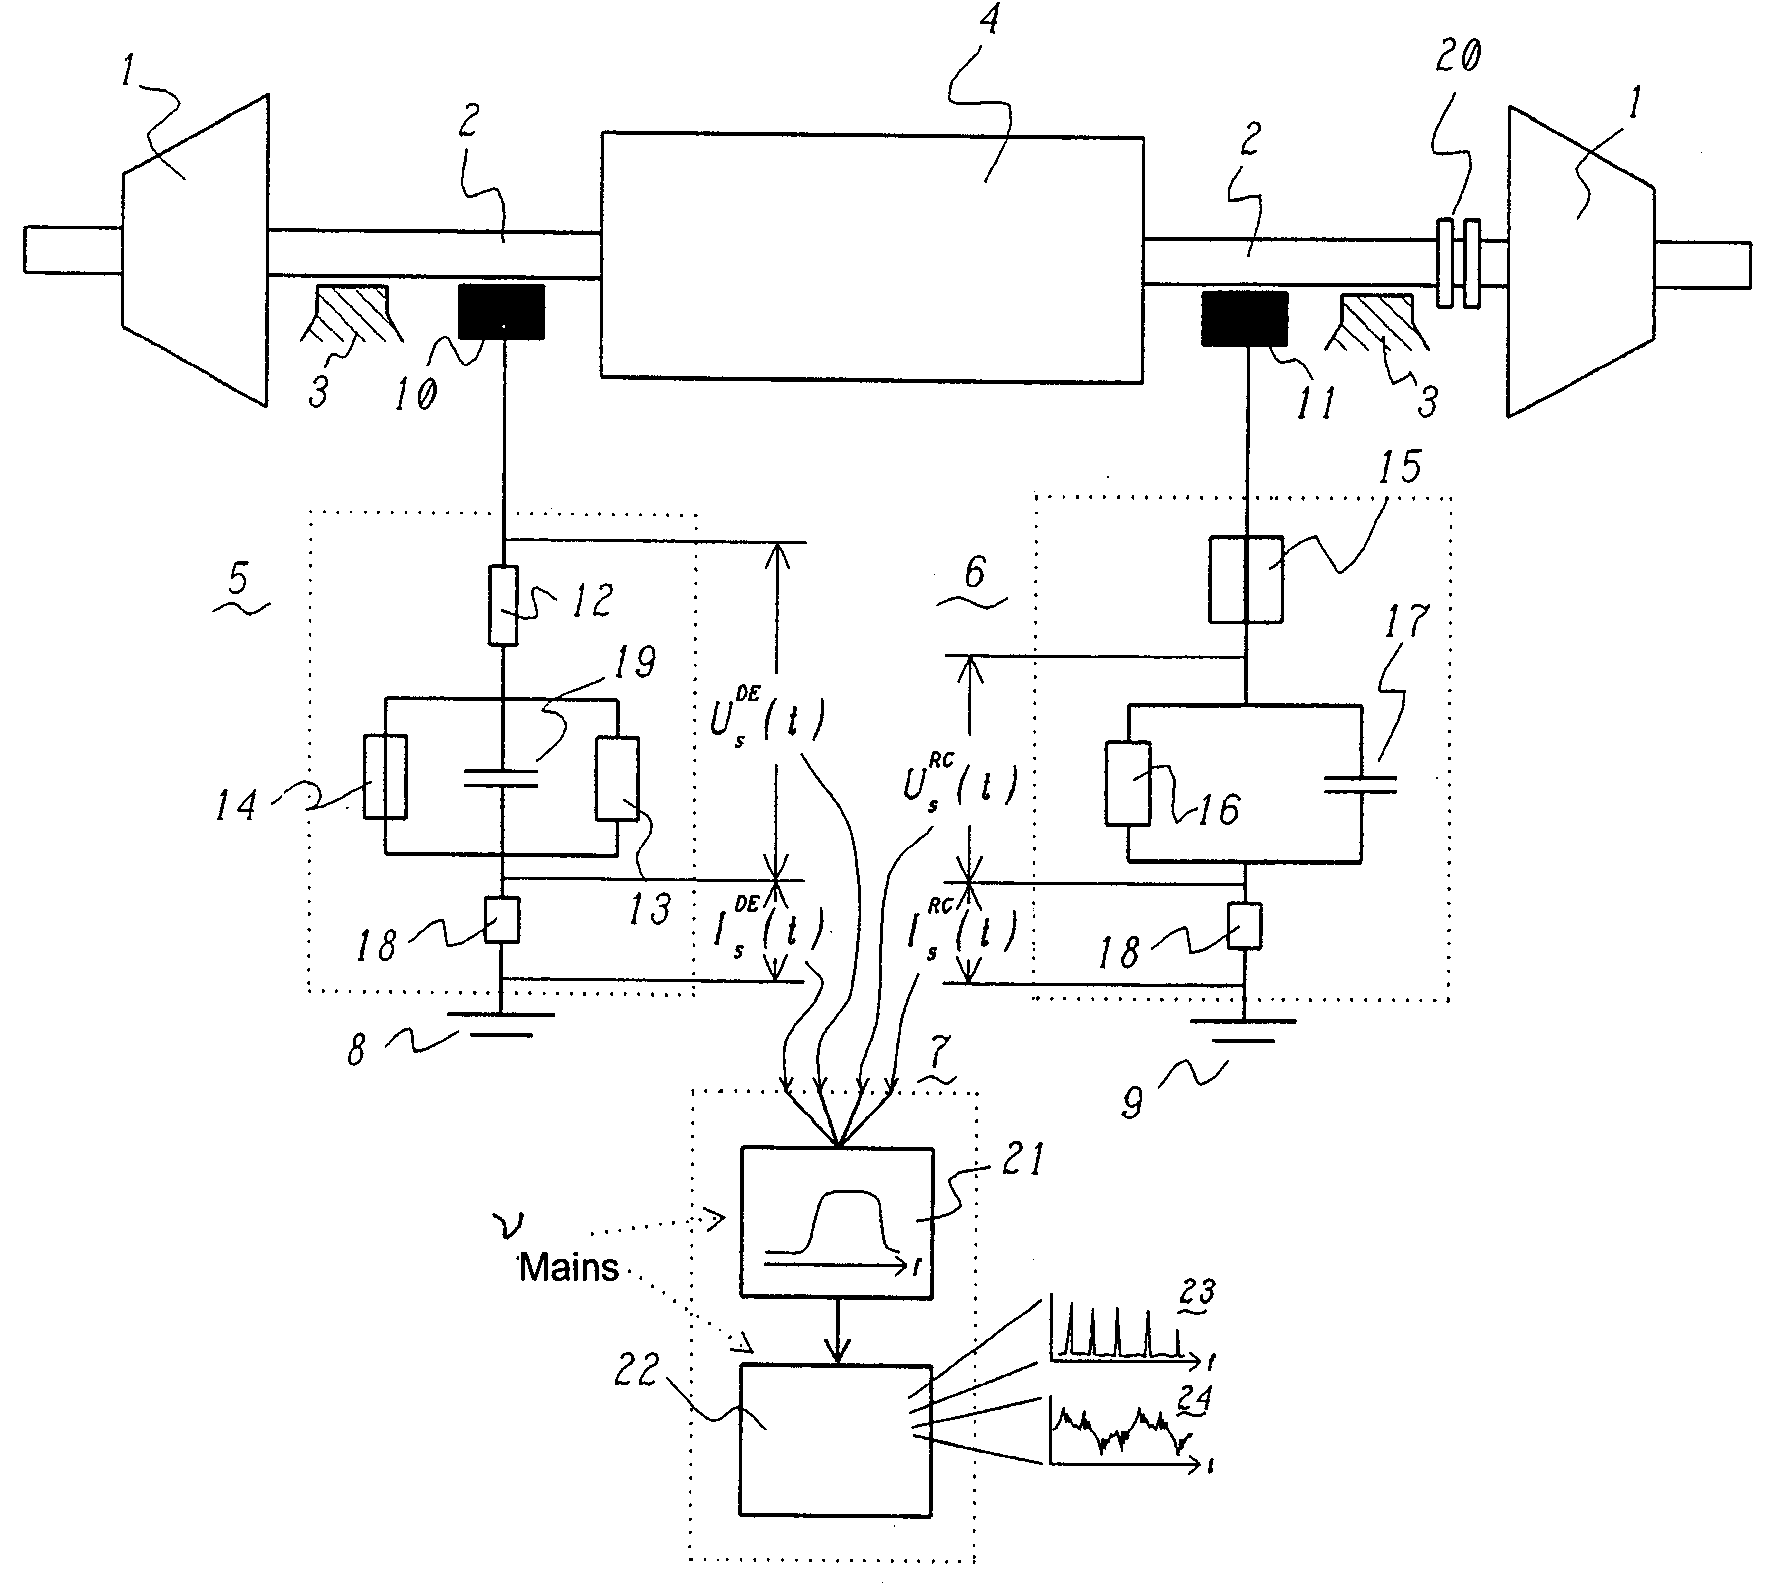 Method and apparatus for detection of brush sparking and spark erosion on electrical machines